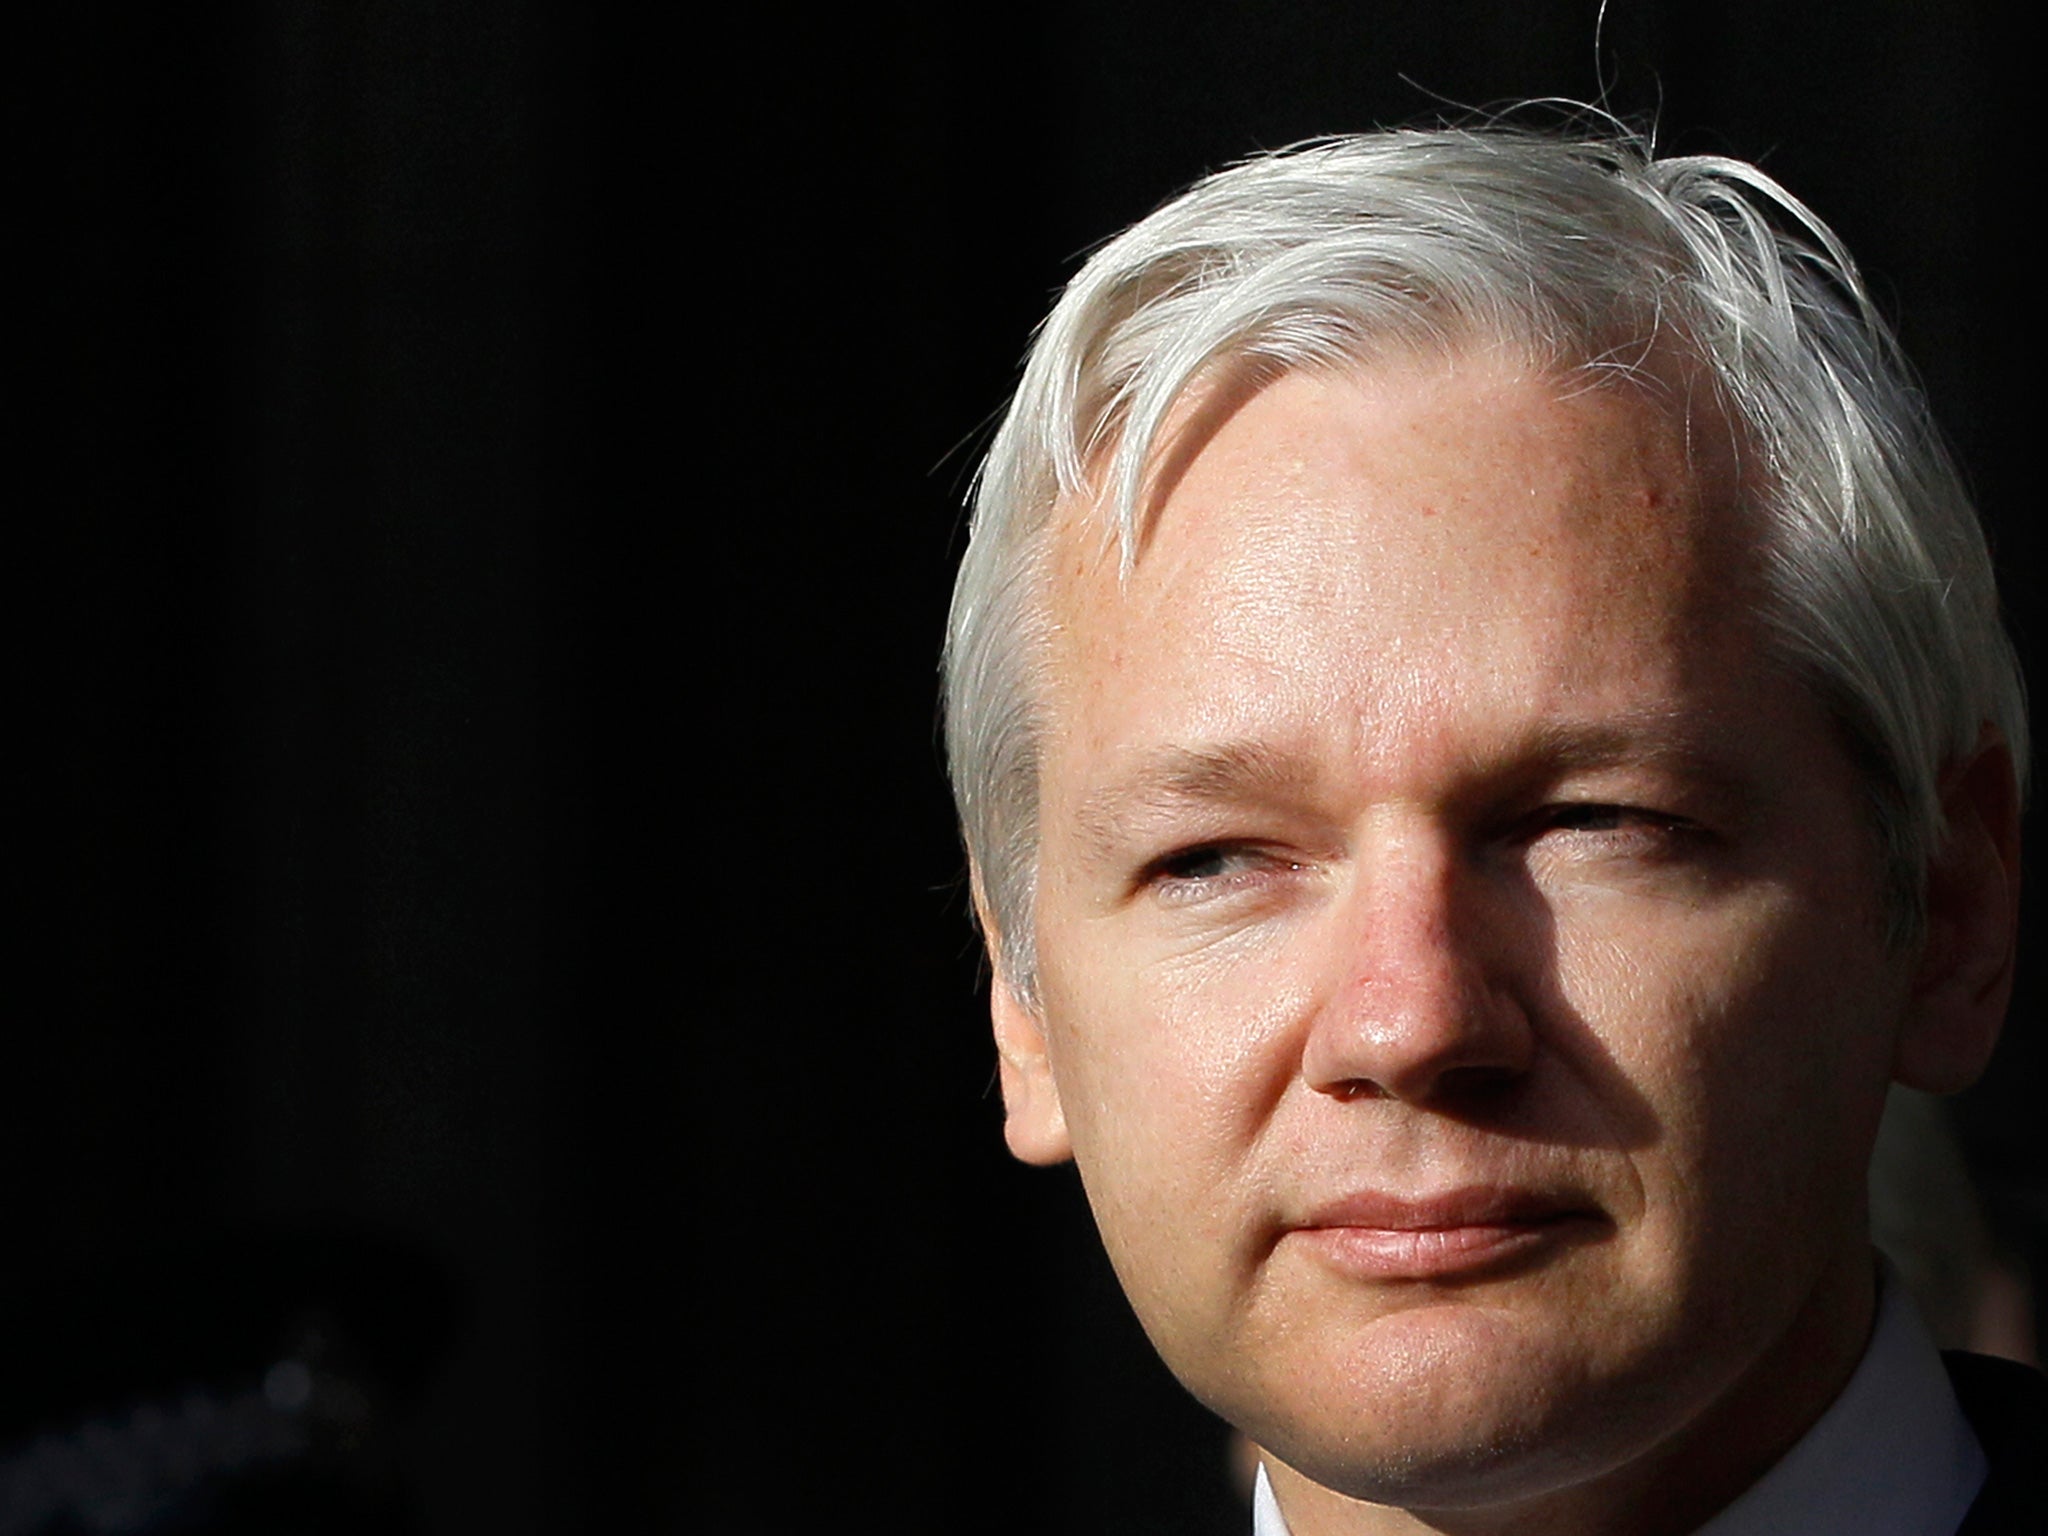 Assange is seeking to avoid extradition to Sweden, where he faces sex allegations by two women - claims he denies